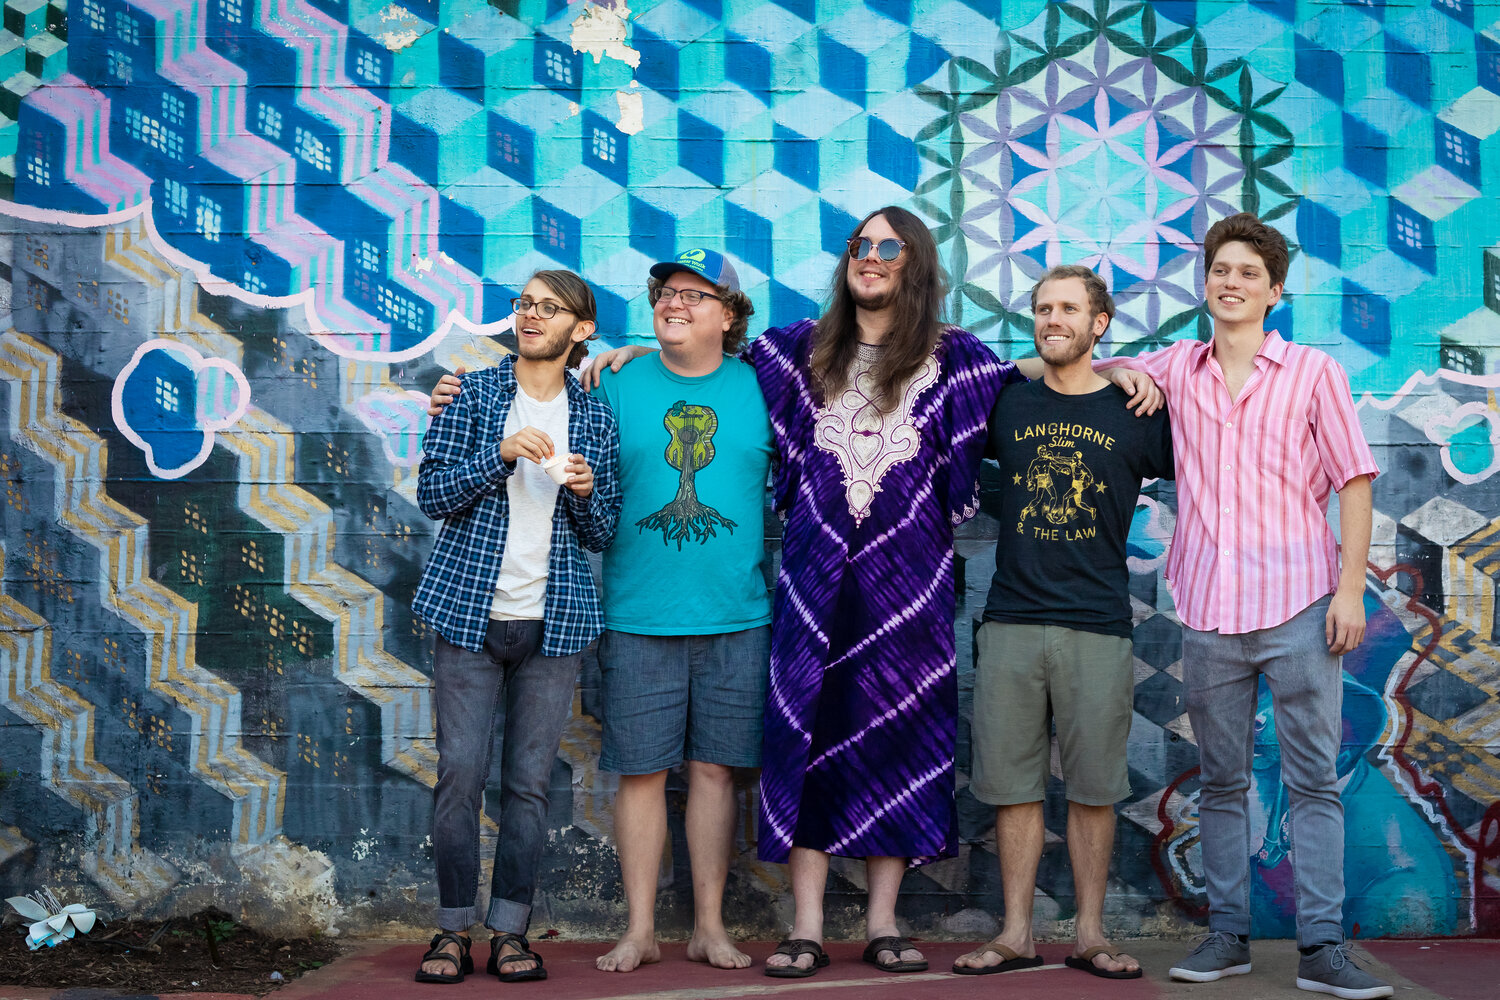 Premiere: Kendall Street Company Create New Animated Video for “Shanti the Dolphin”